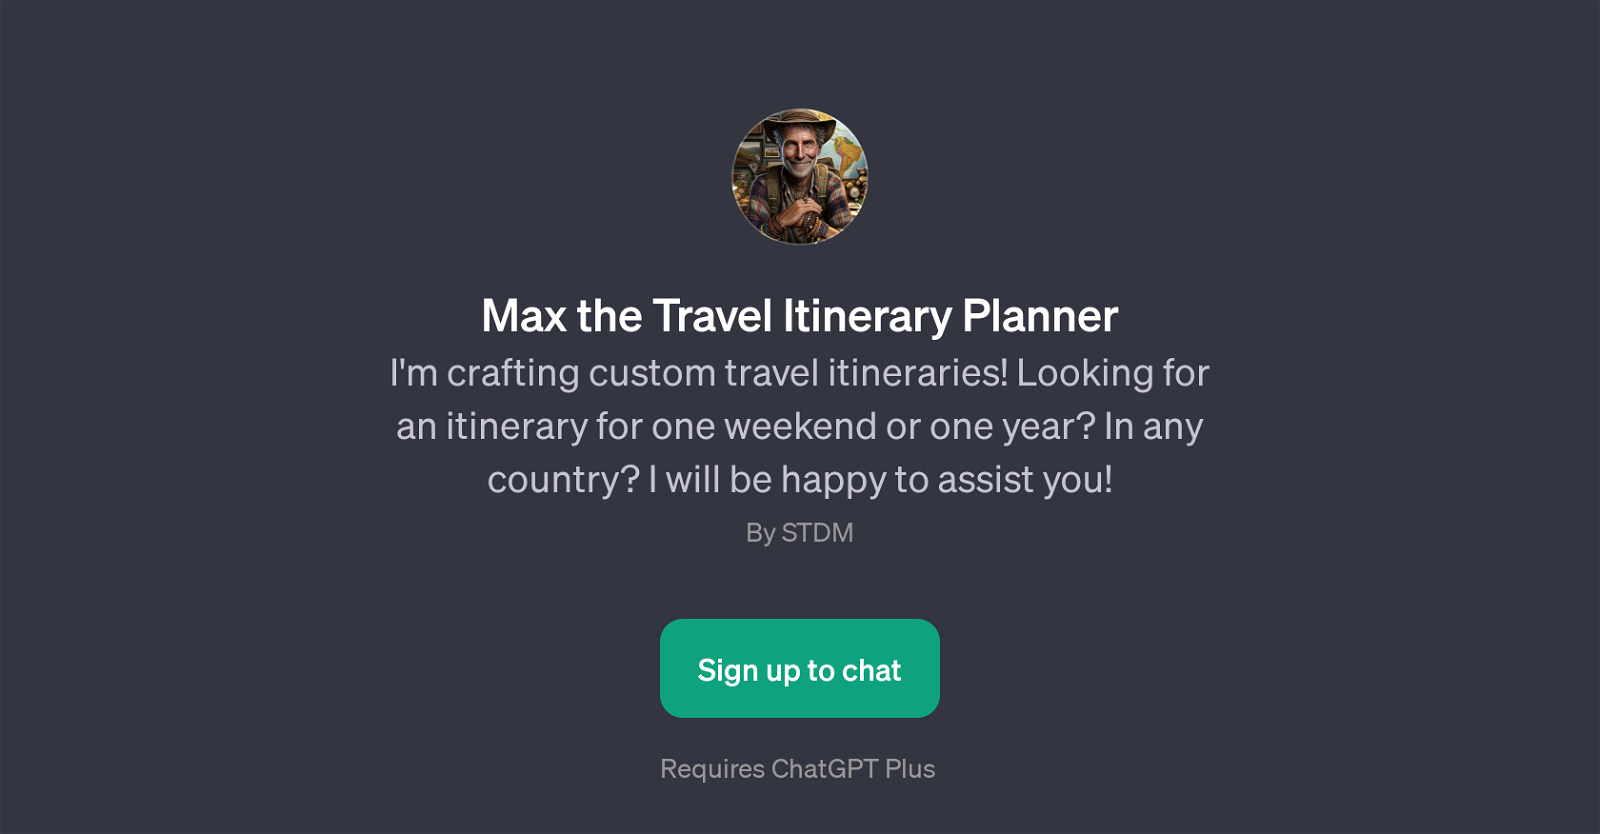 Max the Travel Itinerary Planner website